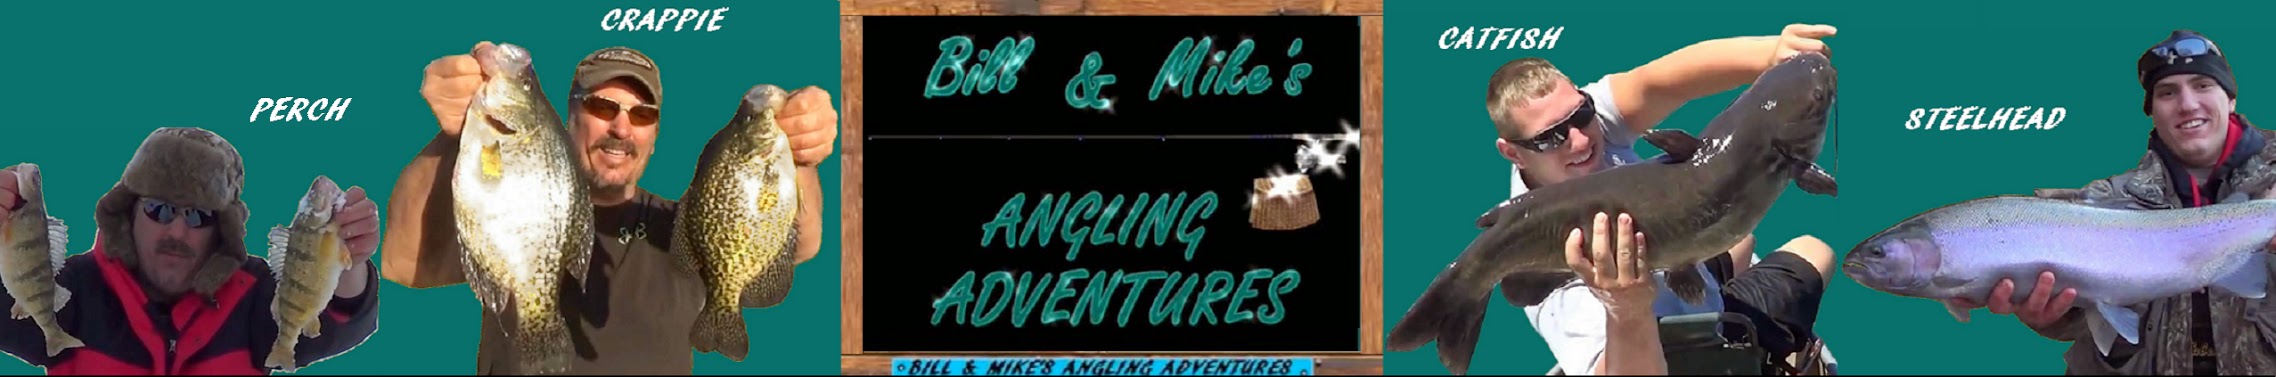 Bill & Mikes Angling Adventures 